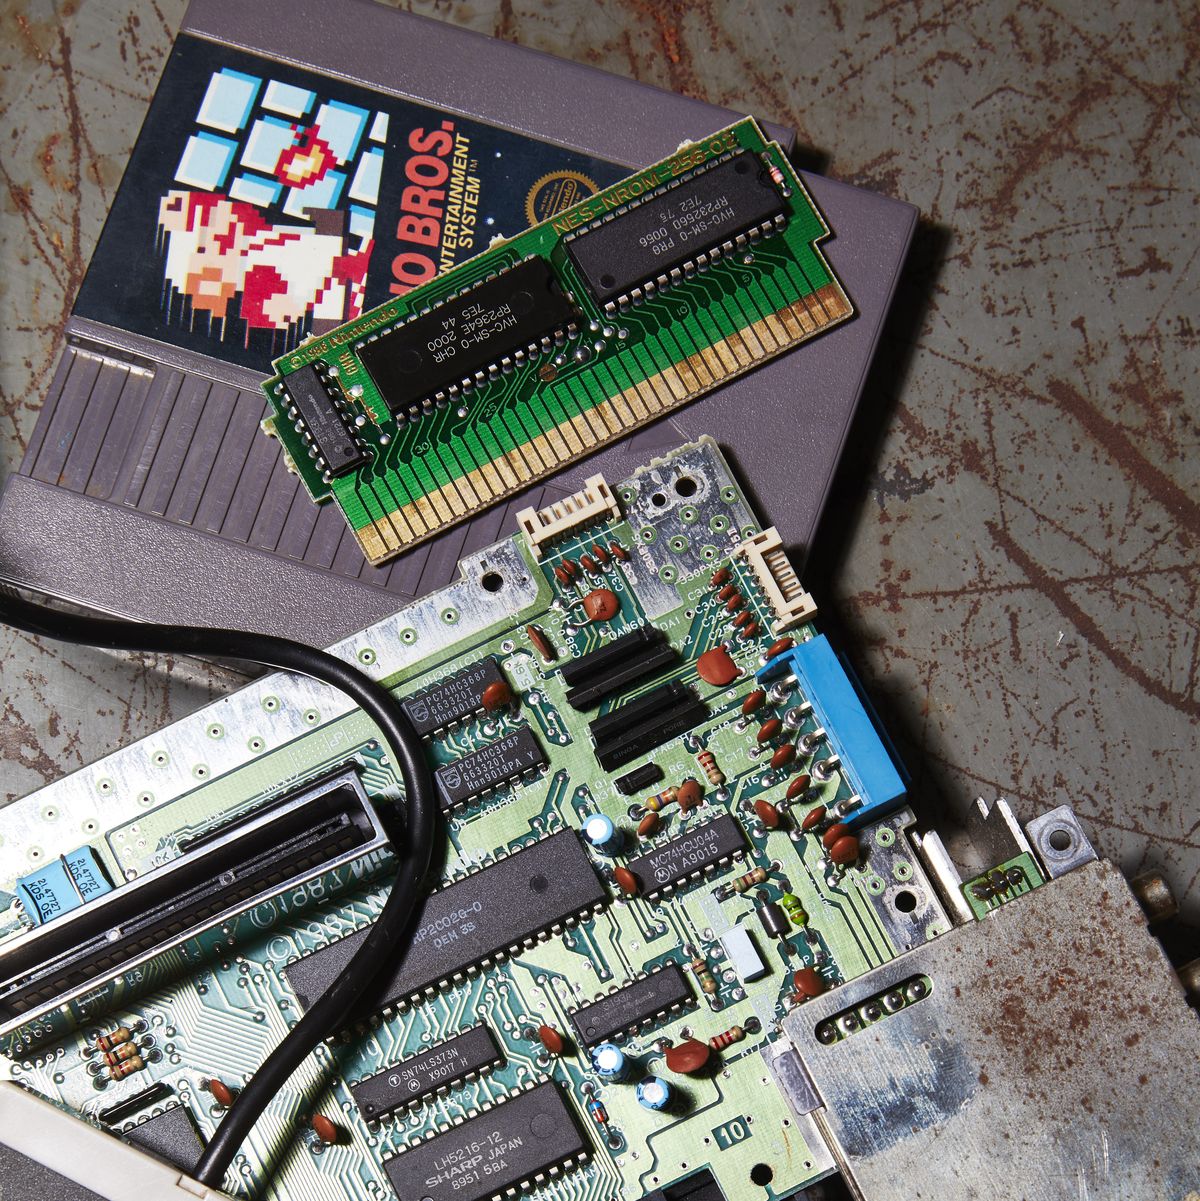 Cracking the Chip: How Hacking NES Made It Even Better